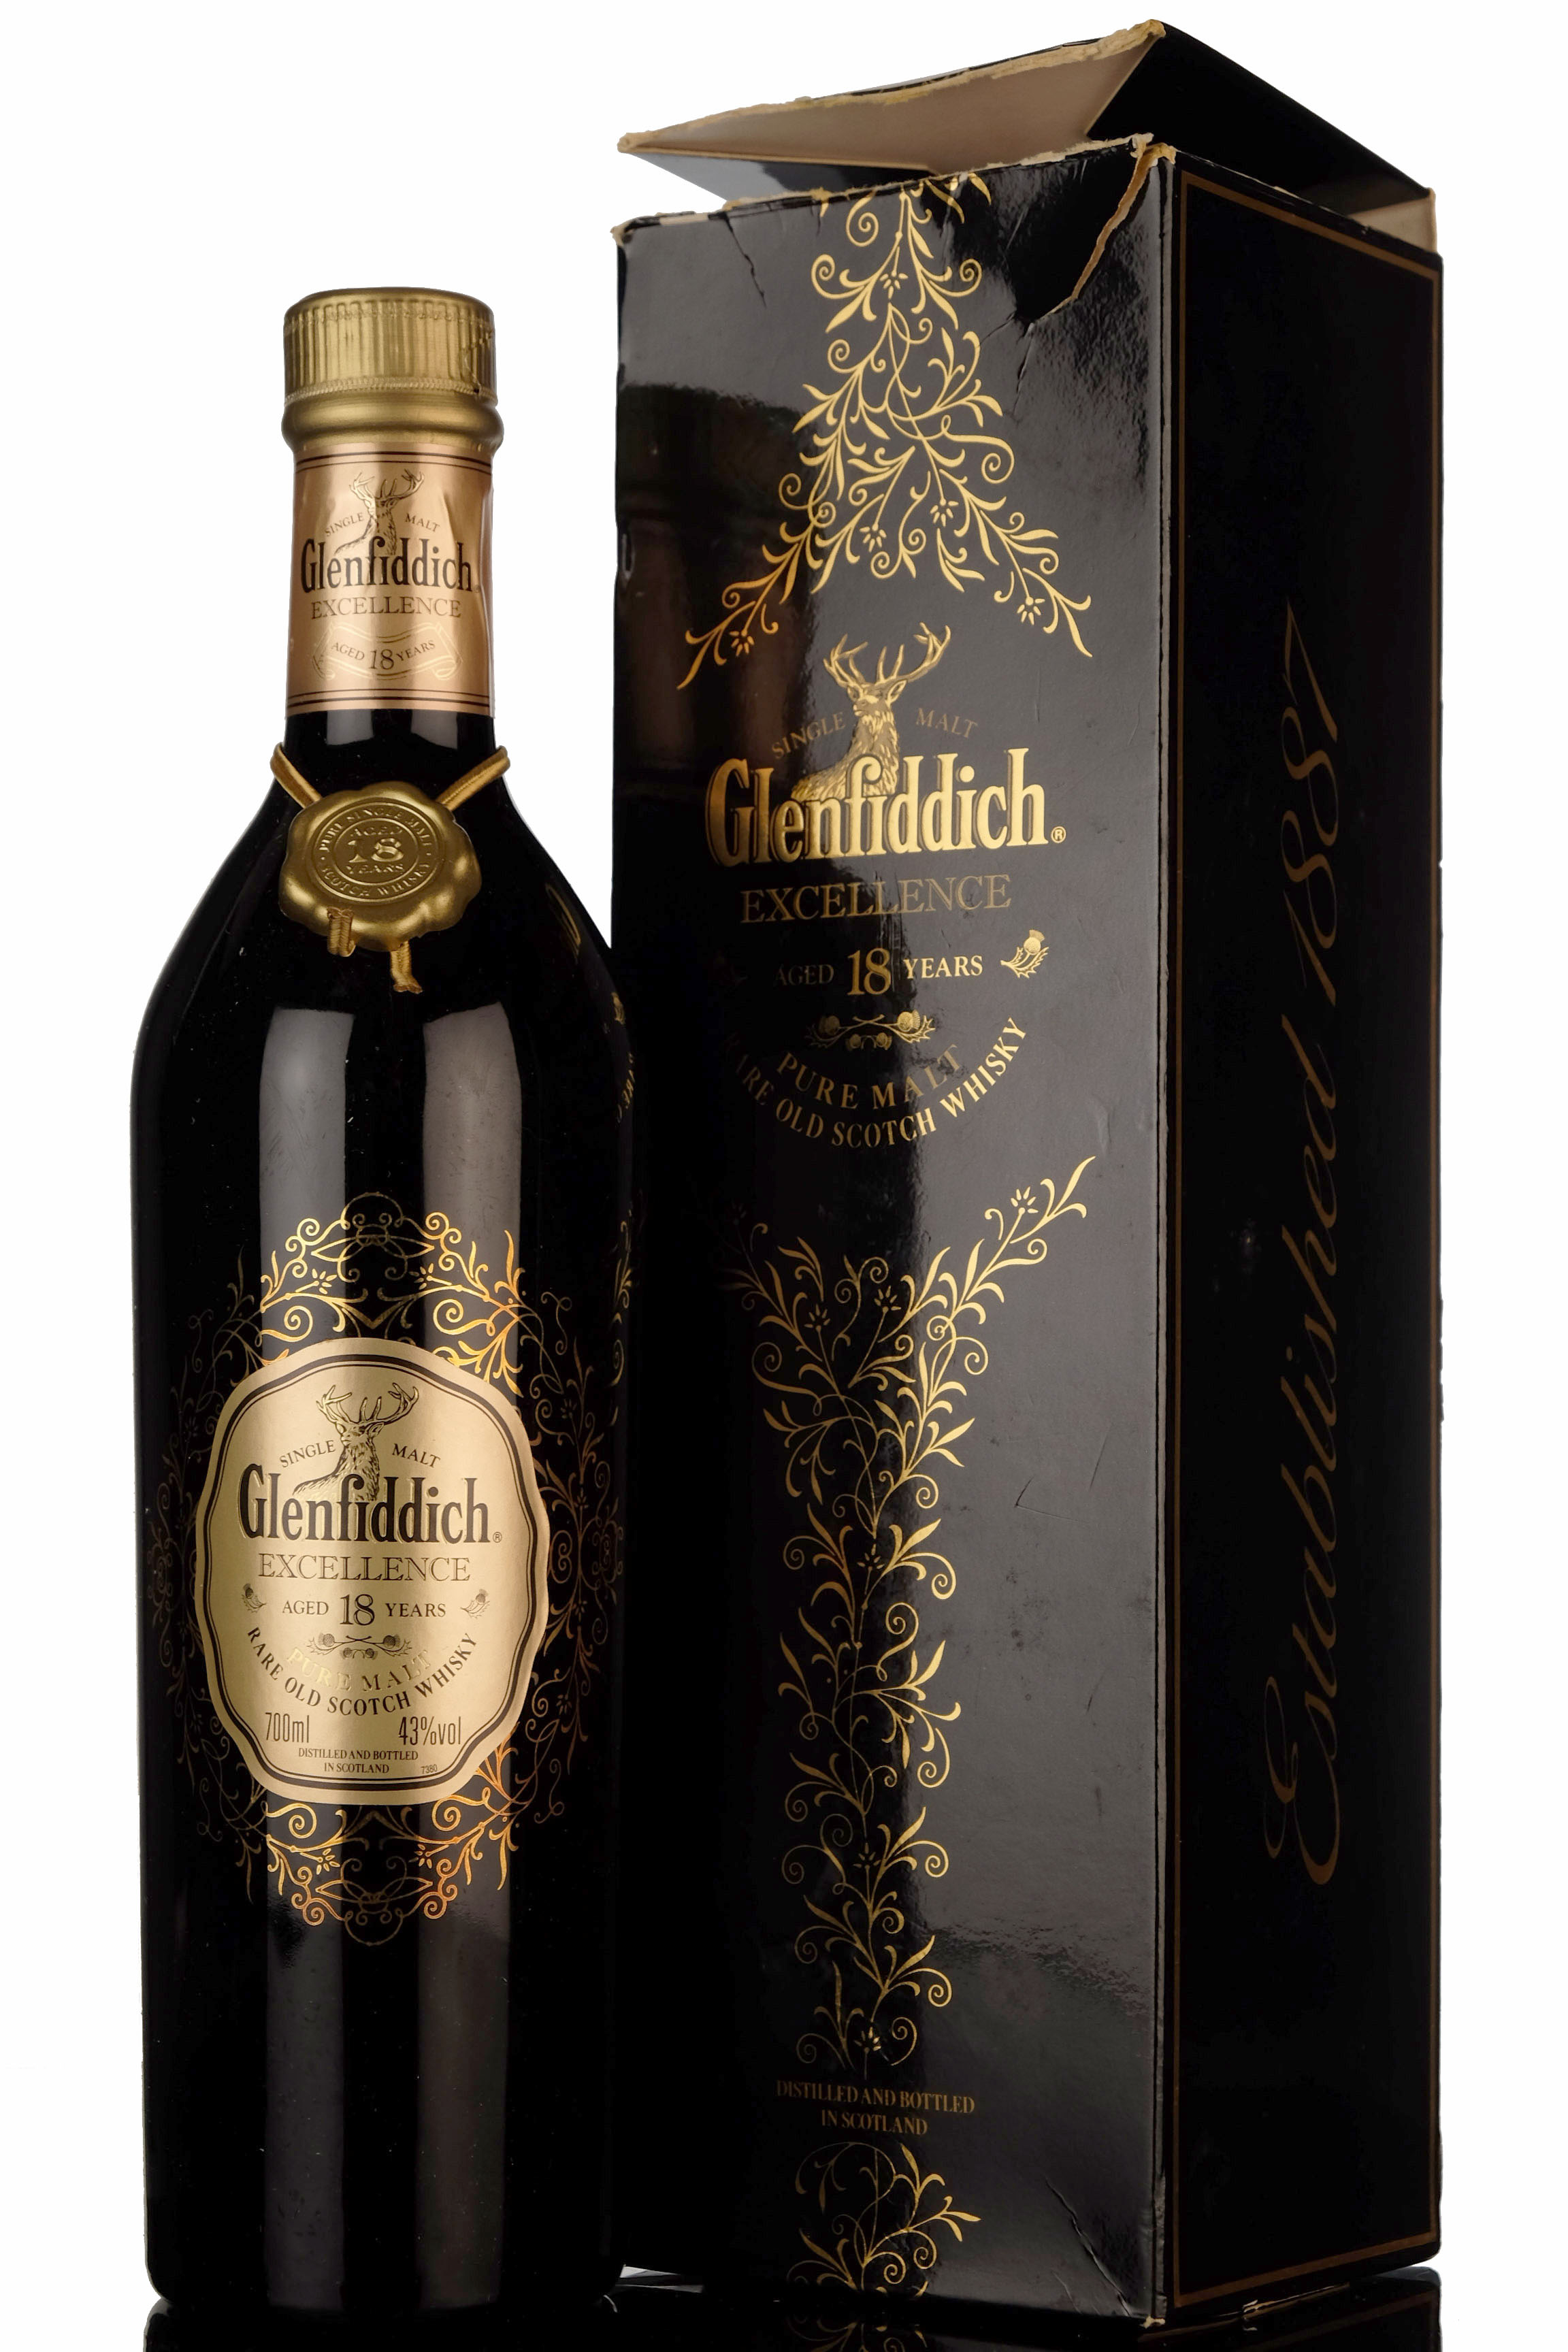 Glenfiddich 18 Year Old - Excellence